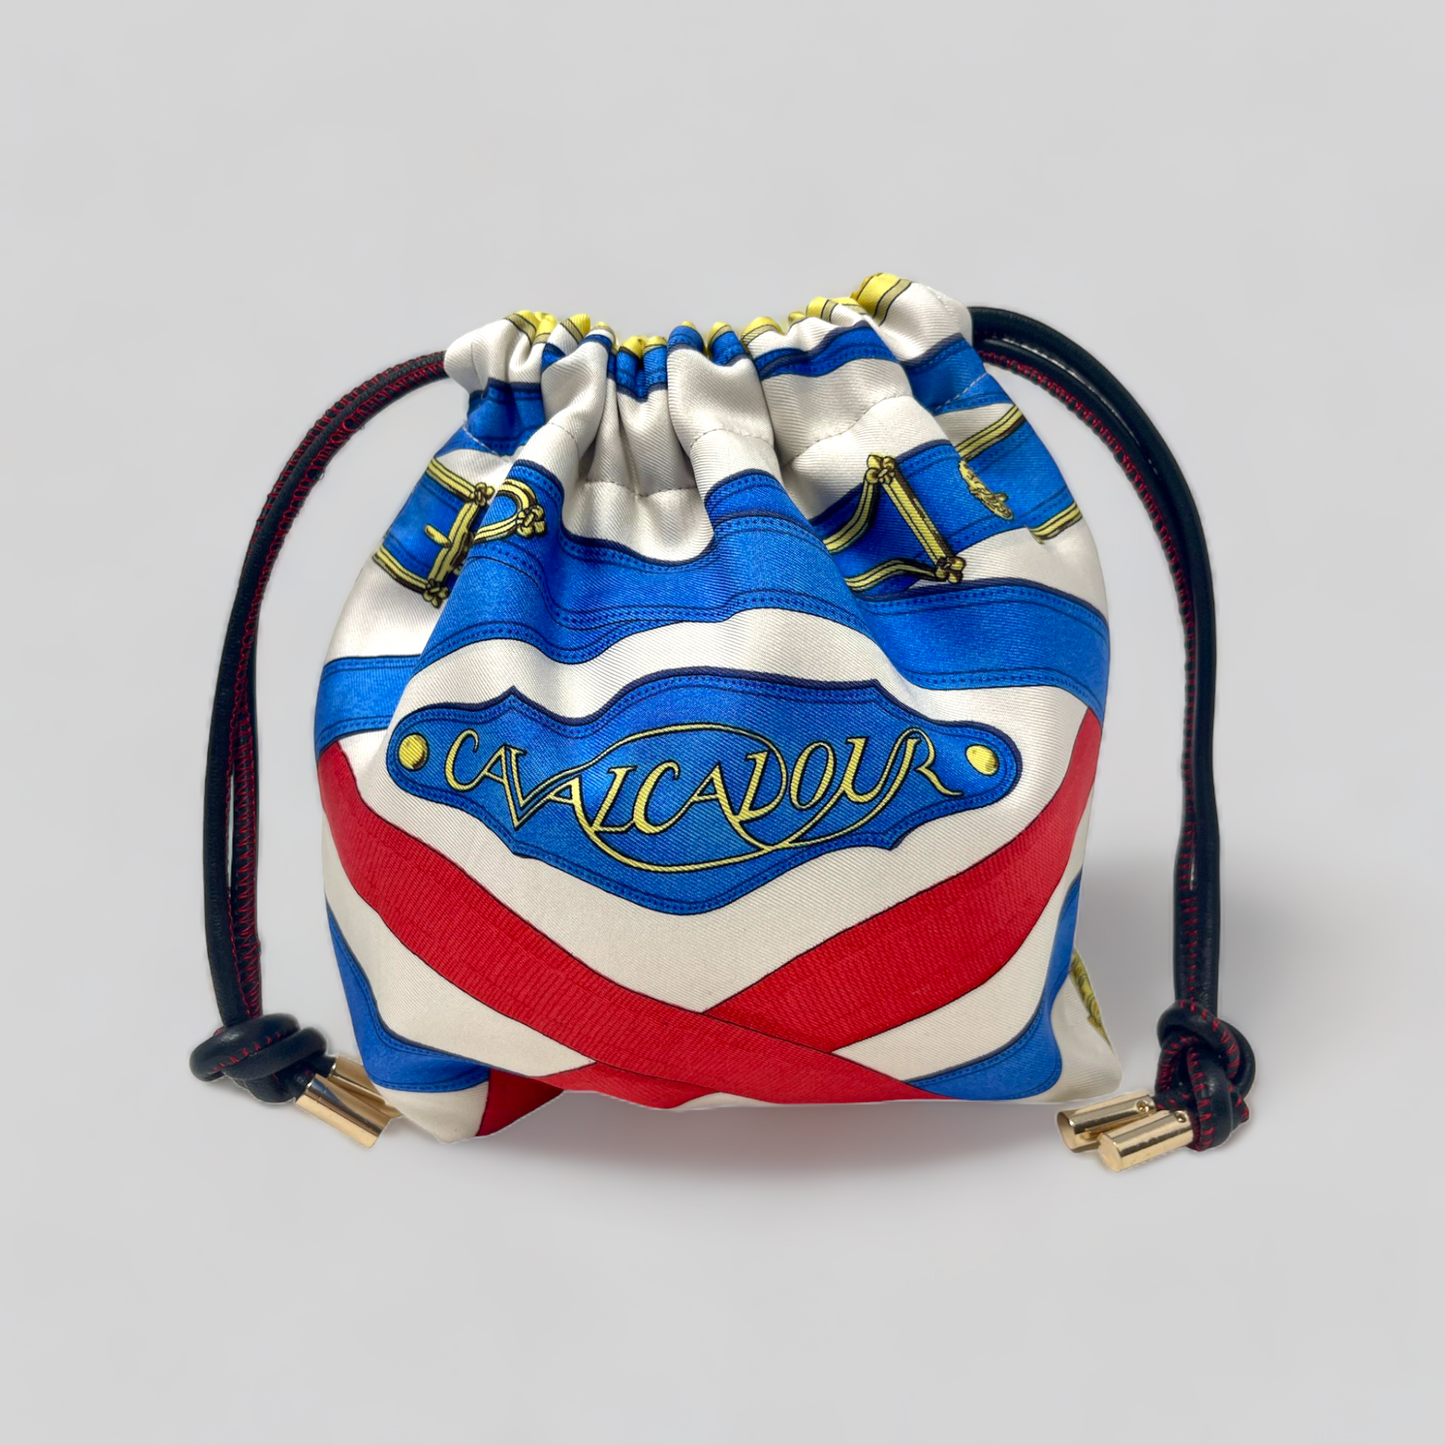 Red White and Blue Ceinture Bag